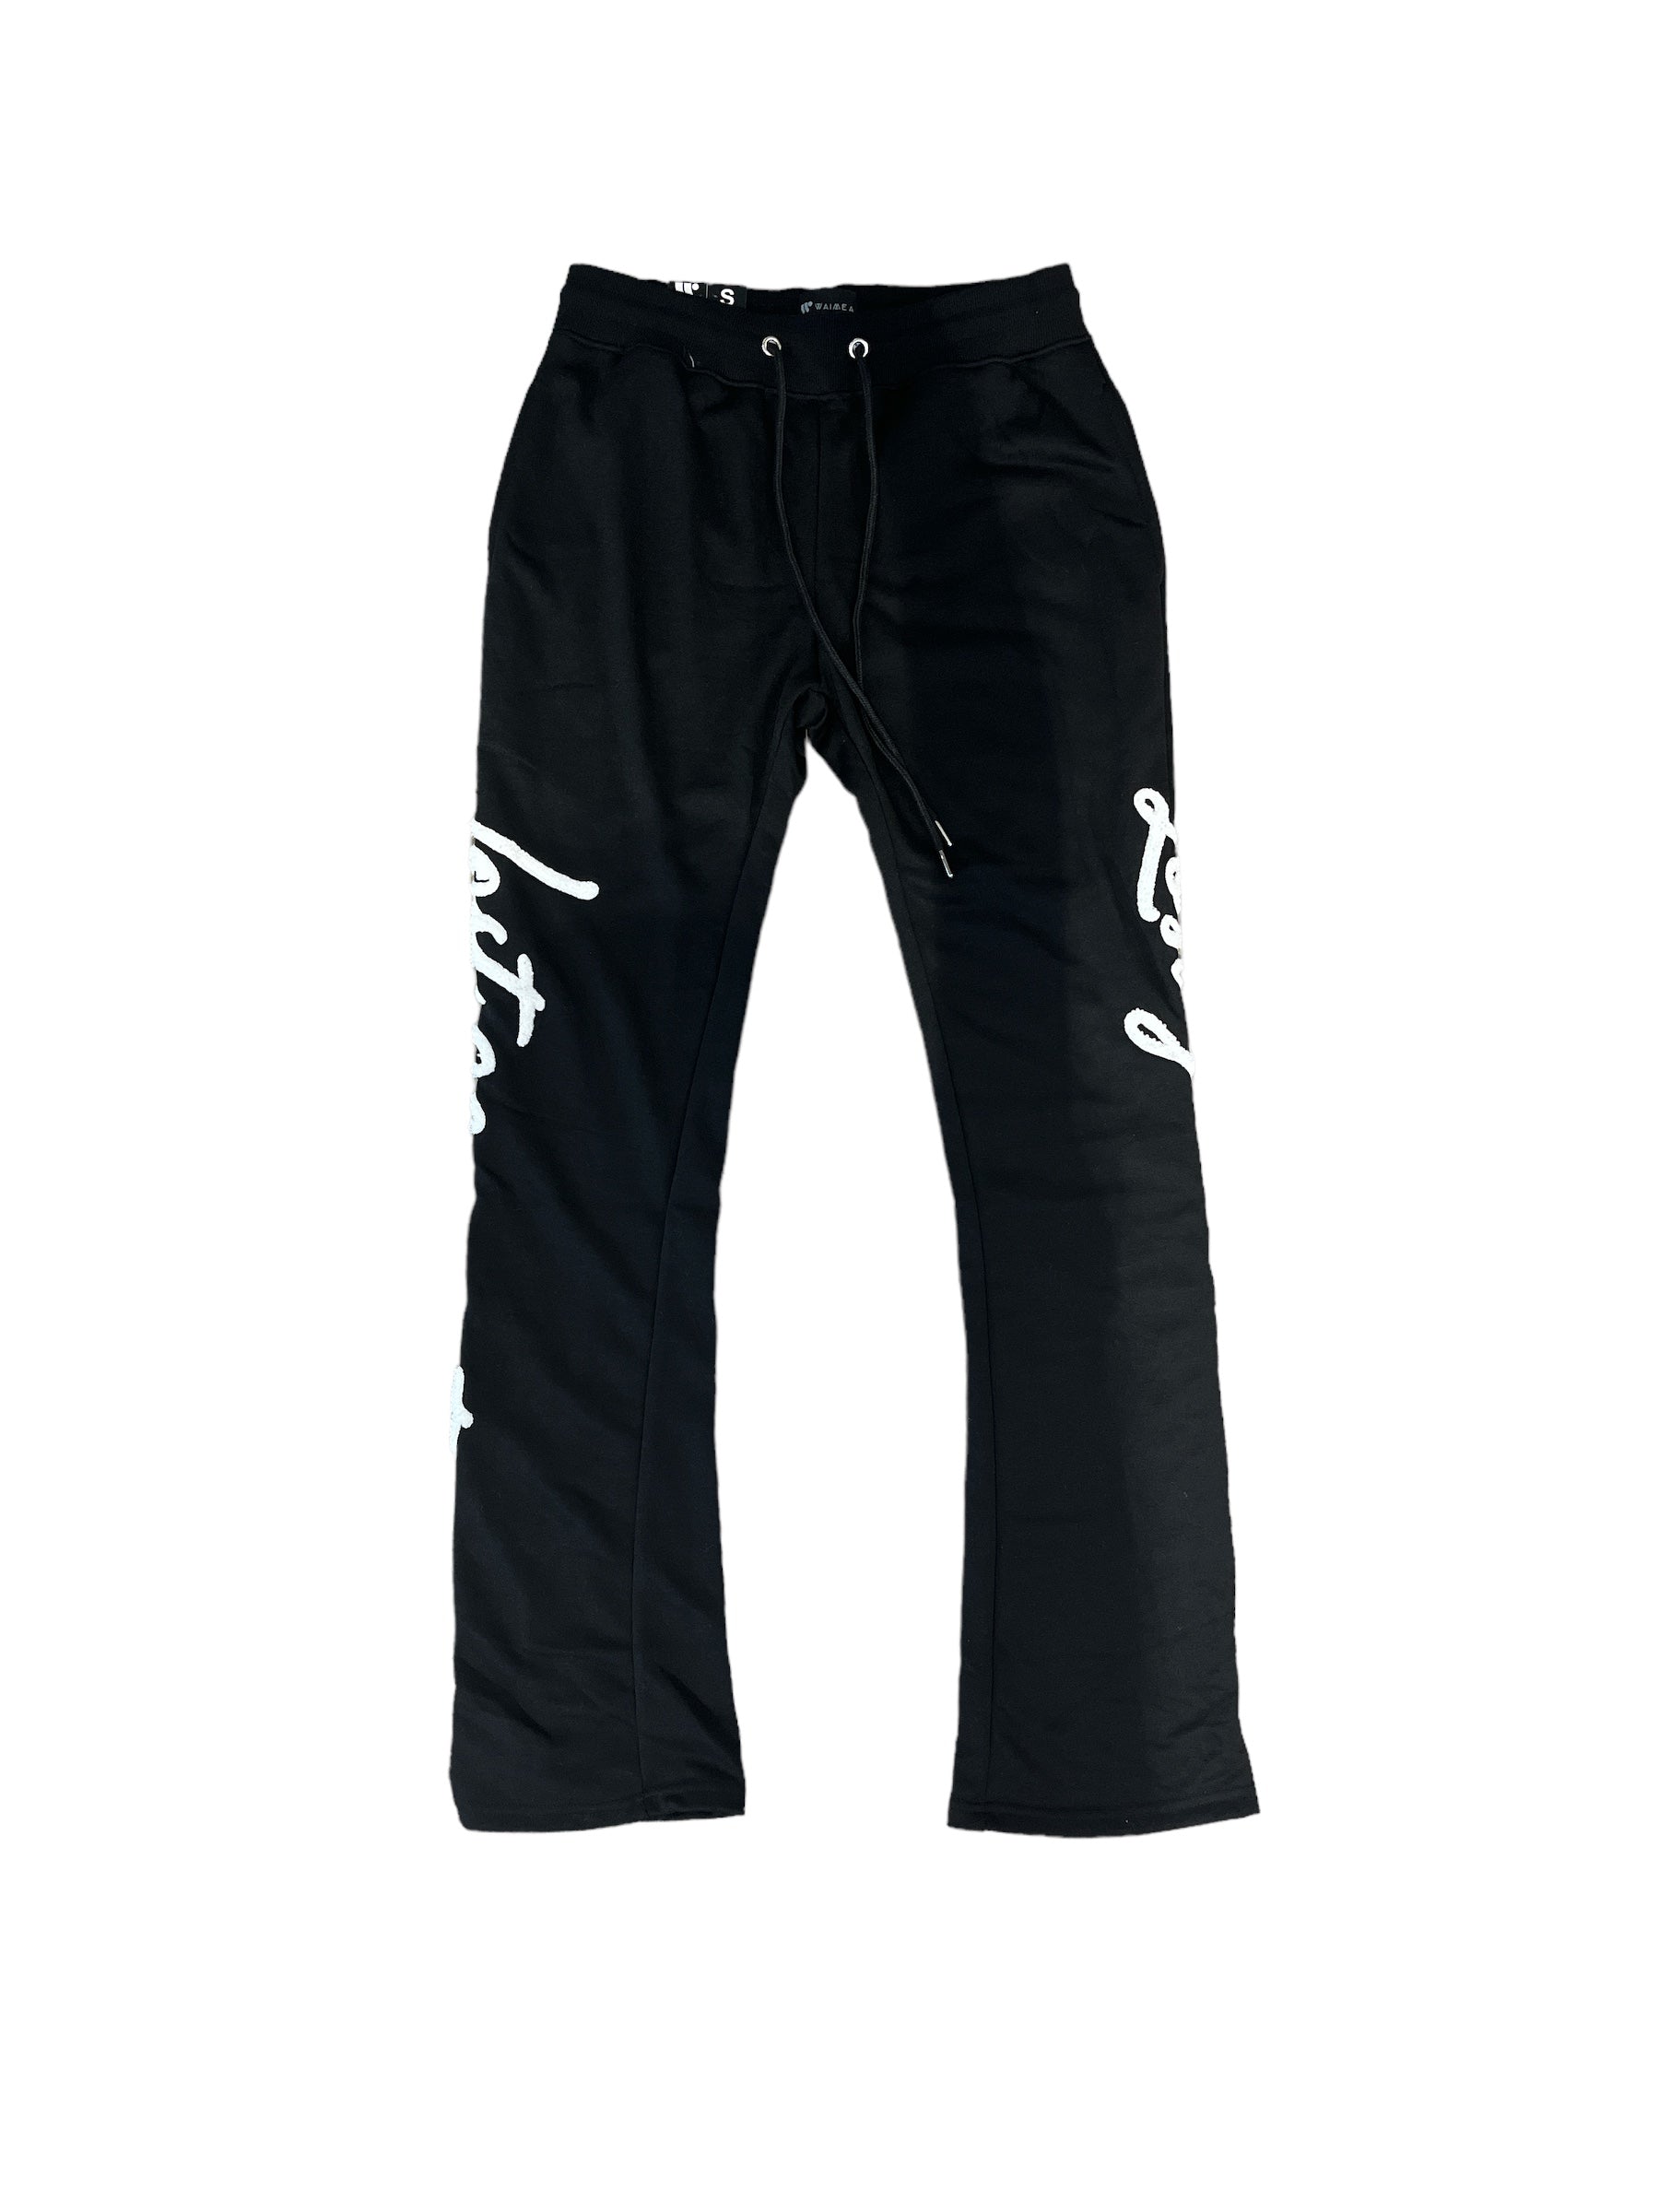 Lost Generations 2 Stacked Sweatpants - Red – Todays Man Store